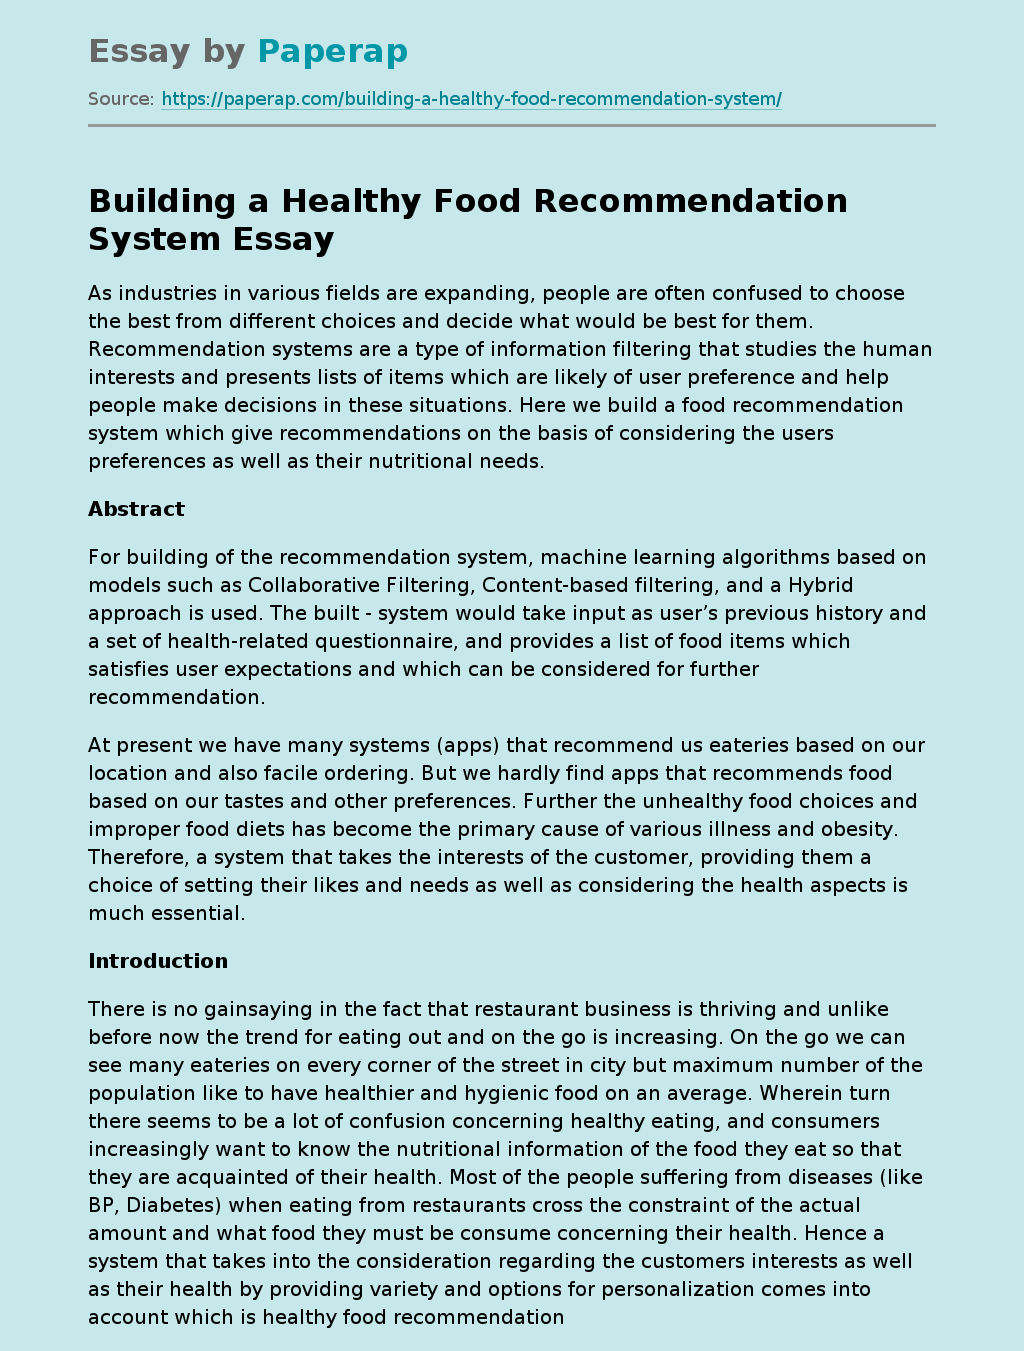 Building a Healthy Food Recommendation System